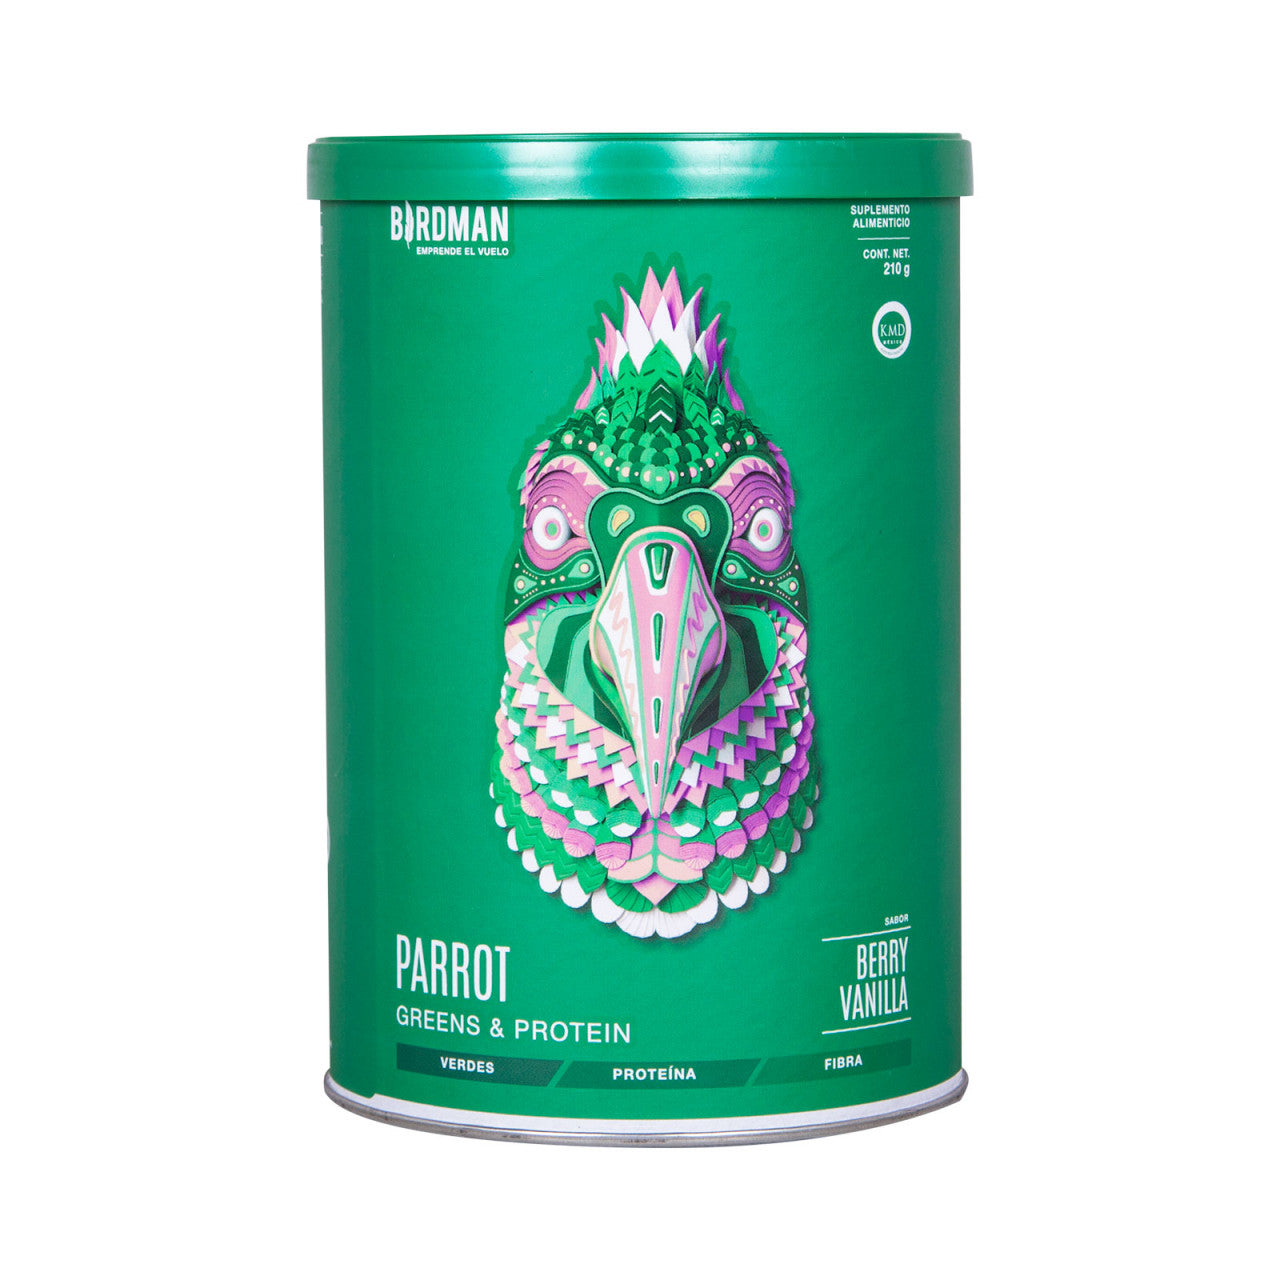 Parrot Greens & Protein - Berry Vainilla 210g